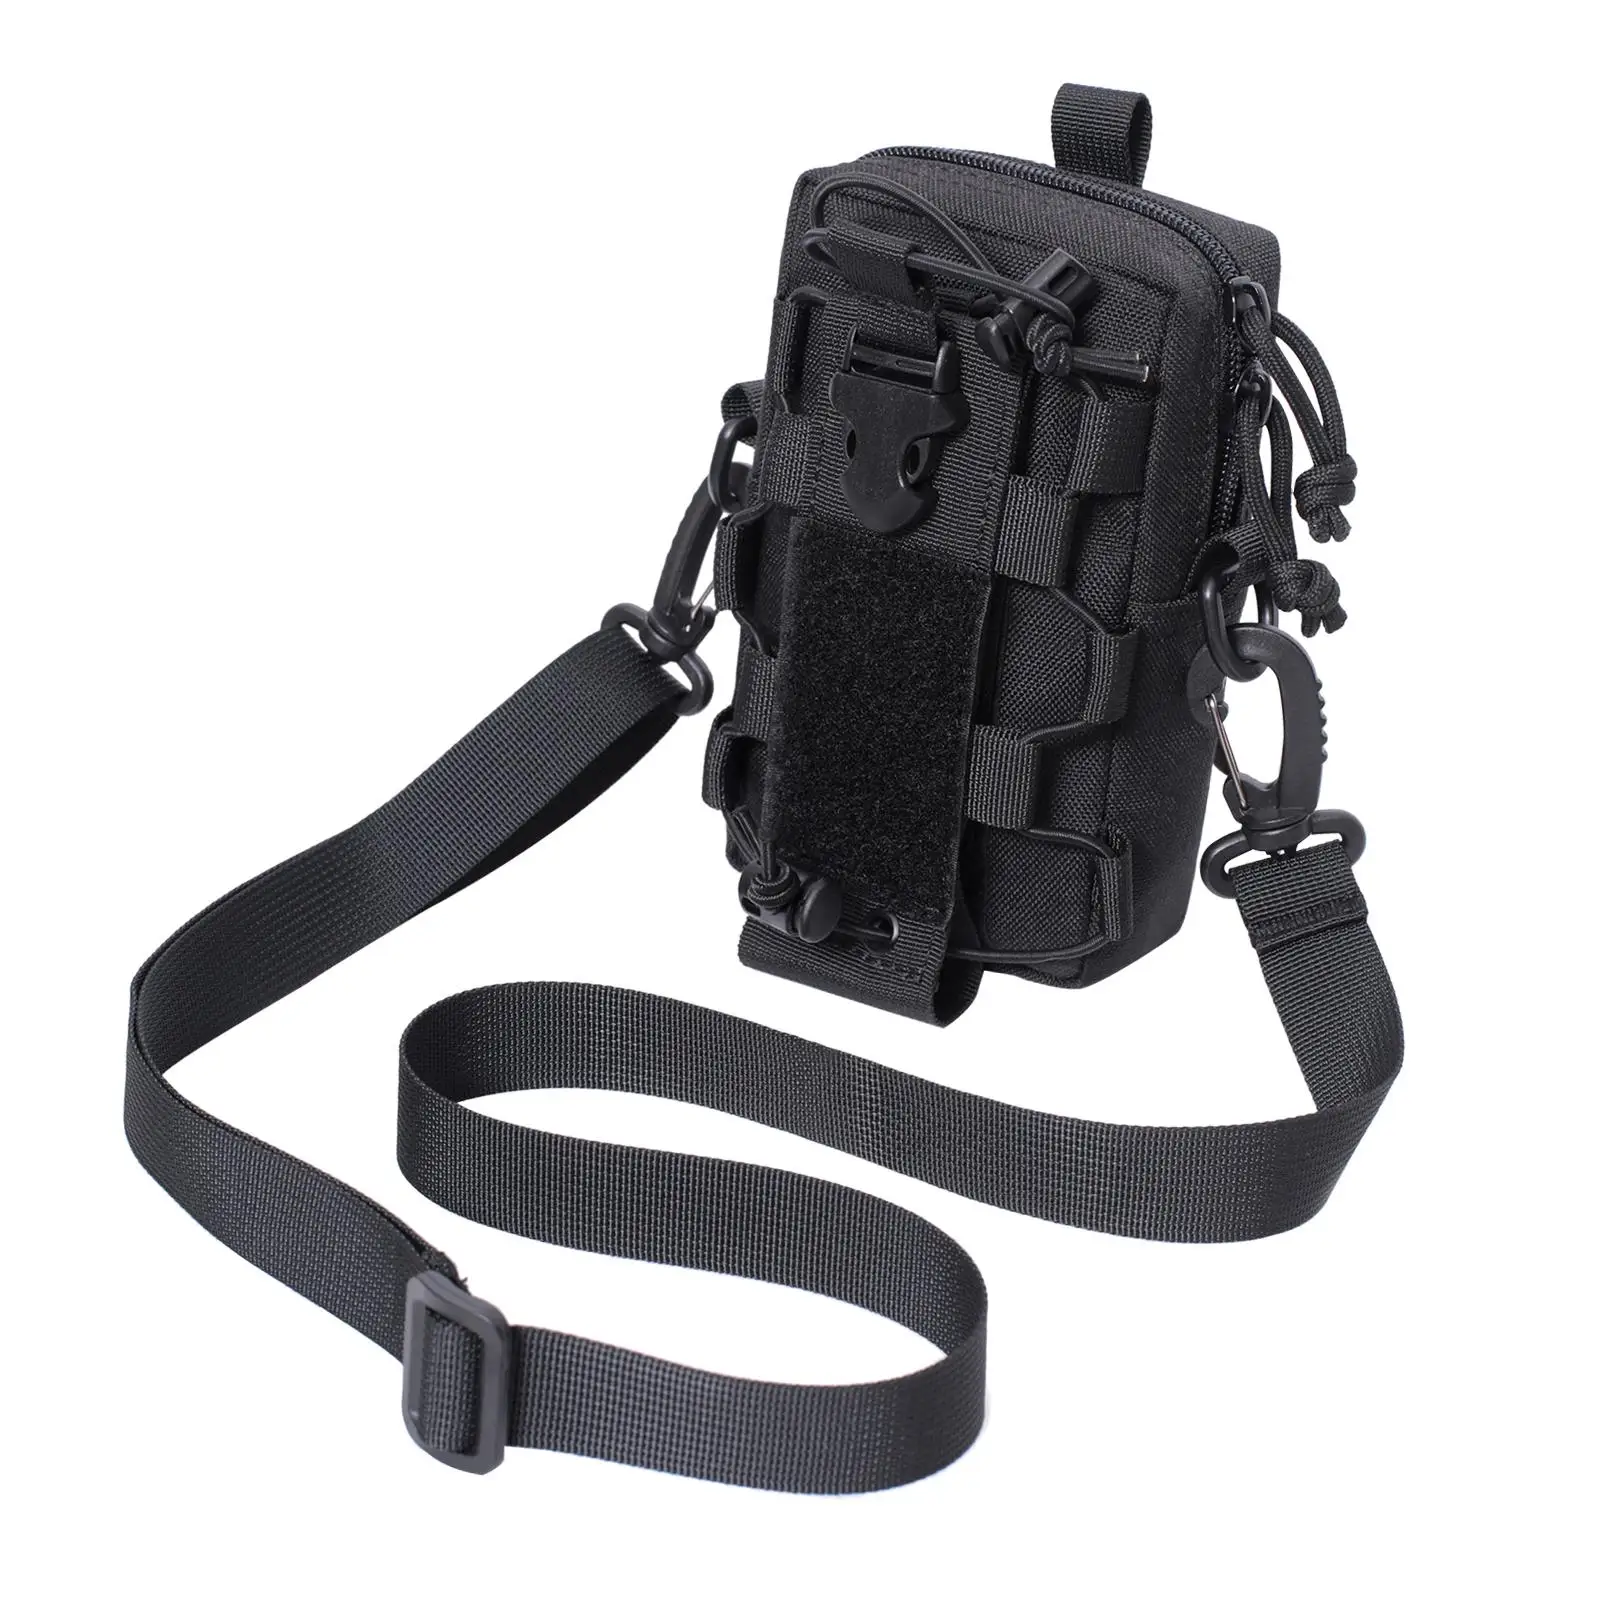  Bag with Shoulder Strap Waist Bag Pouch Organizer for Travel Hiking